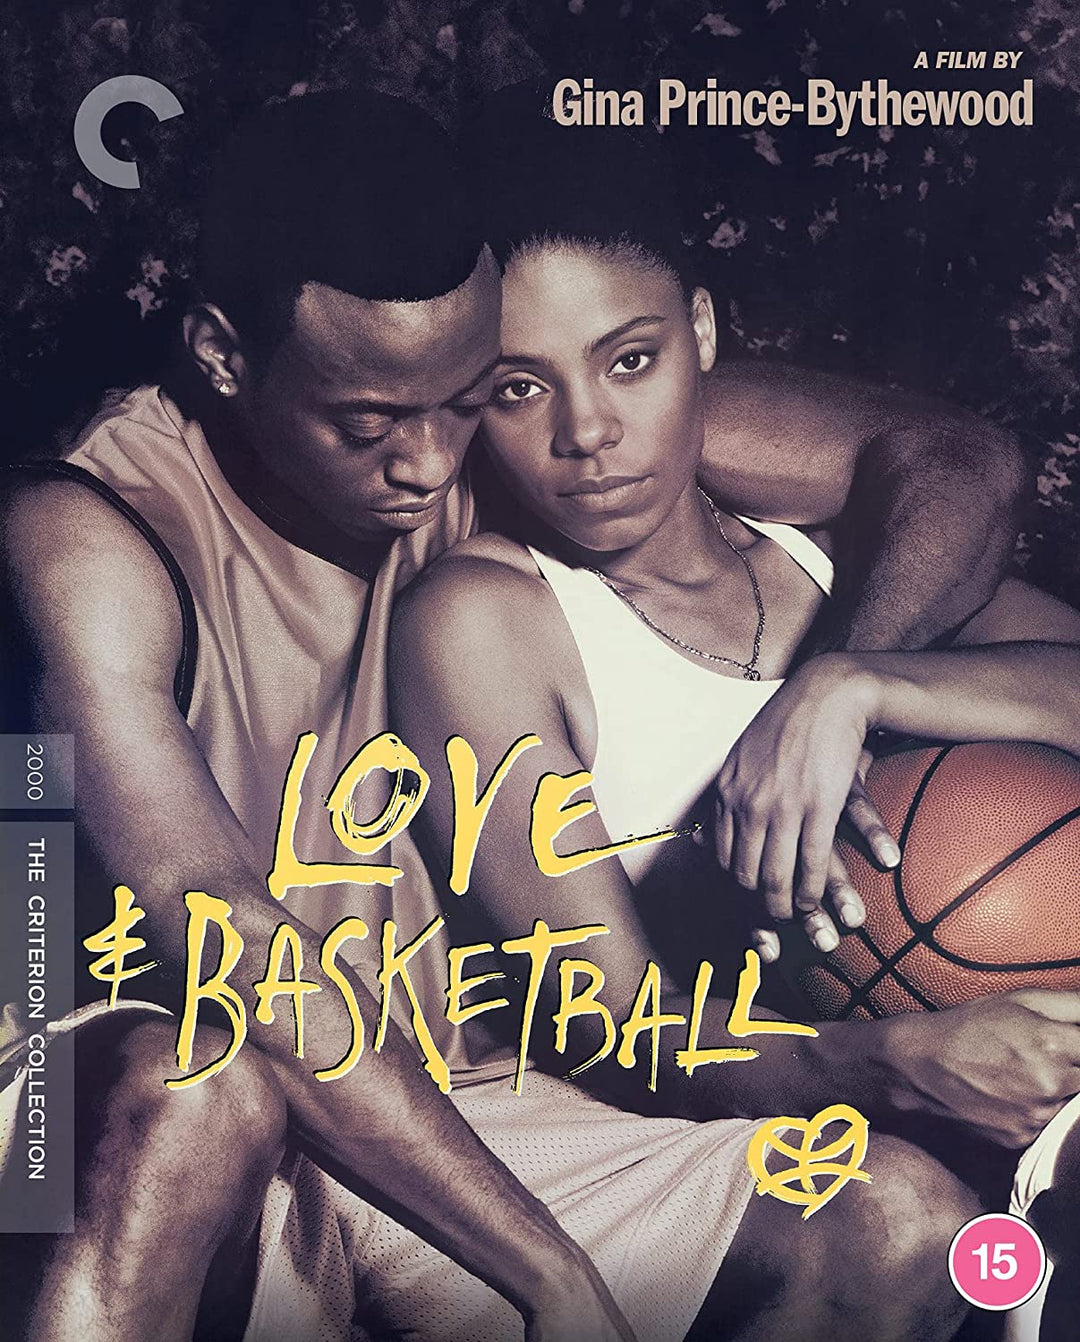 Love & Basketball (2000) (Criterion Collection) UK Only  -Romance/Sport [Blu-ray]